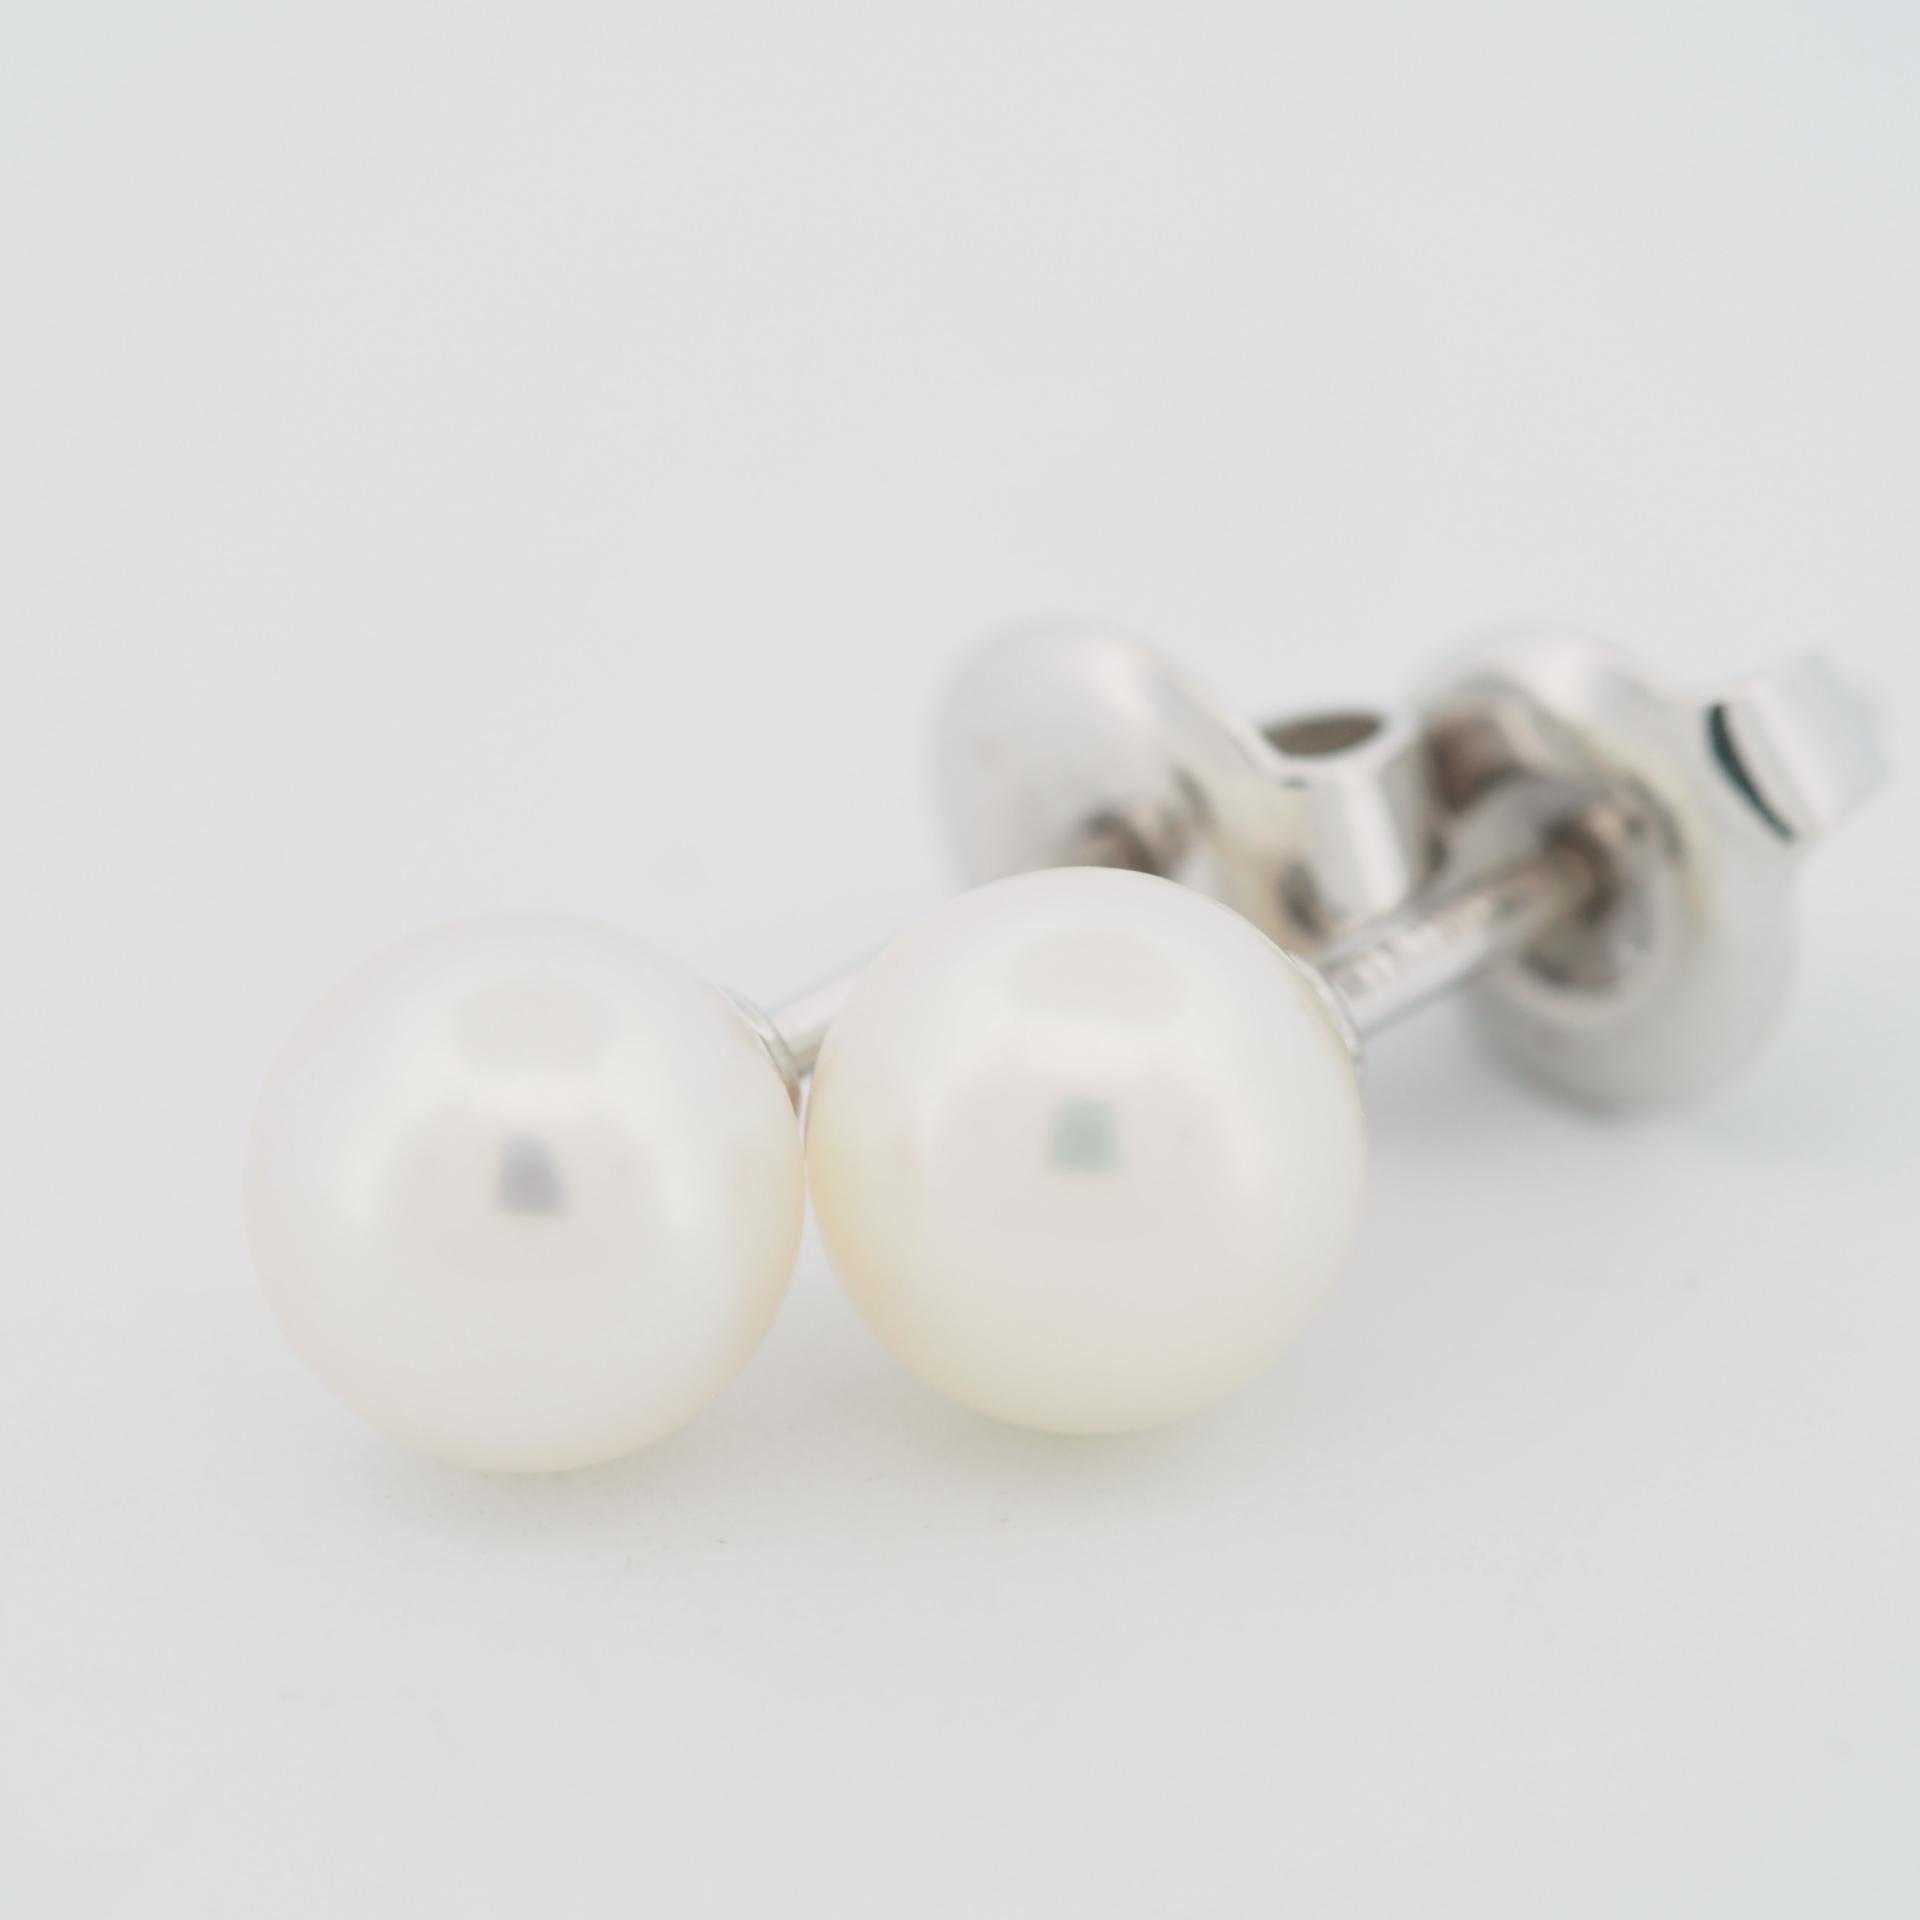 Item: Mikimoto Akoya Pearl Post Earrings
Stones: 6.2 mm Akoya Pearl
Metal: 18K White Gold
Weight: 1.6 Grams (total)
Condition: Used
Retail Price: ---
Signatures: MIKIMOTO, K18
Accessories: Inner Box (broken)

These are authentic Mikimoto Akoya Pearl